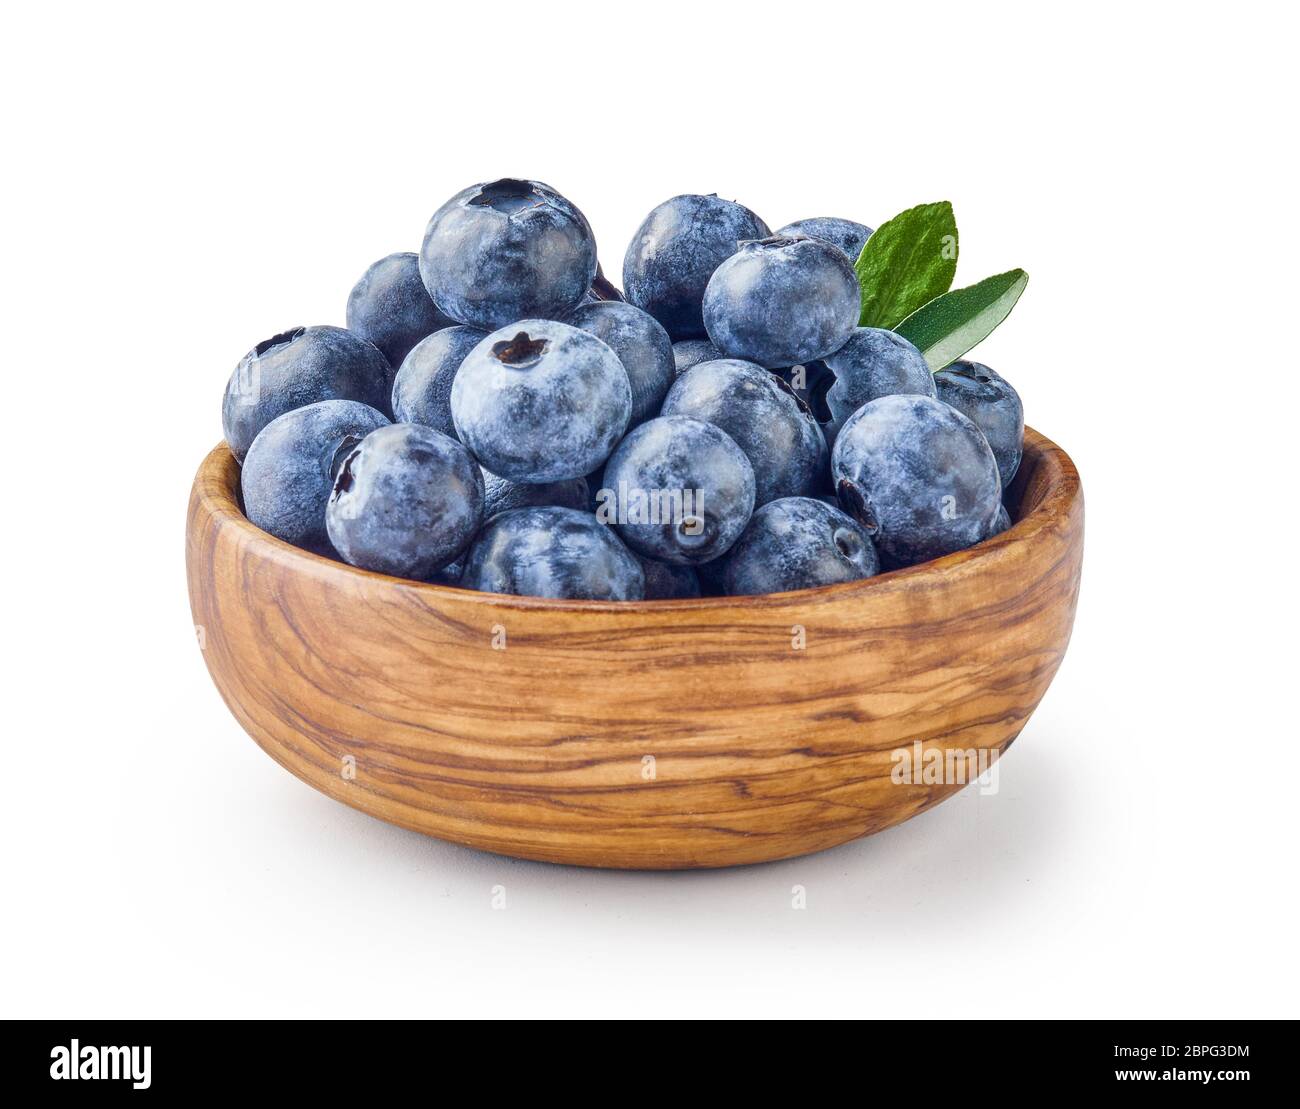 Beautiful blueberries with blueberry leaves in wooden bowl isolated on white background. Stock Photo